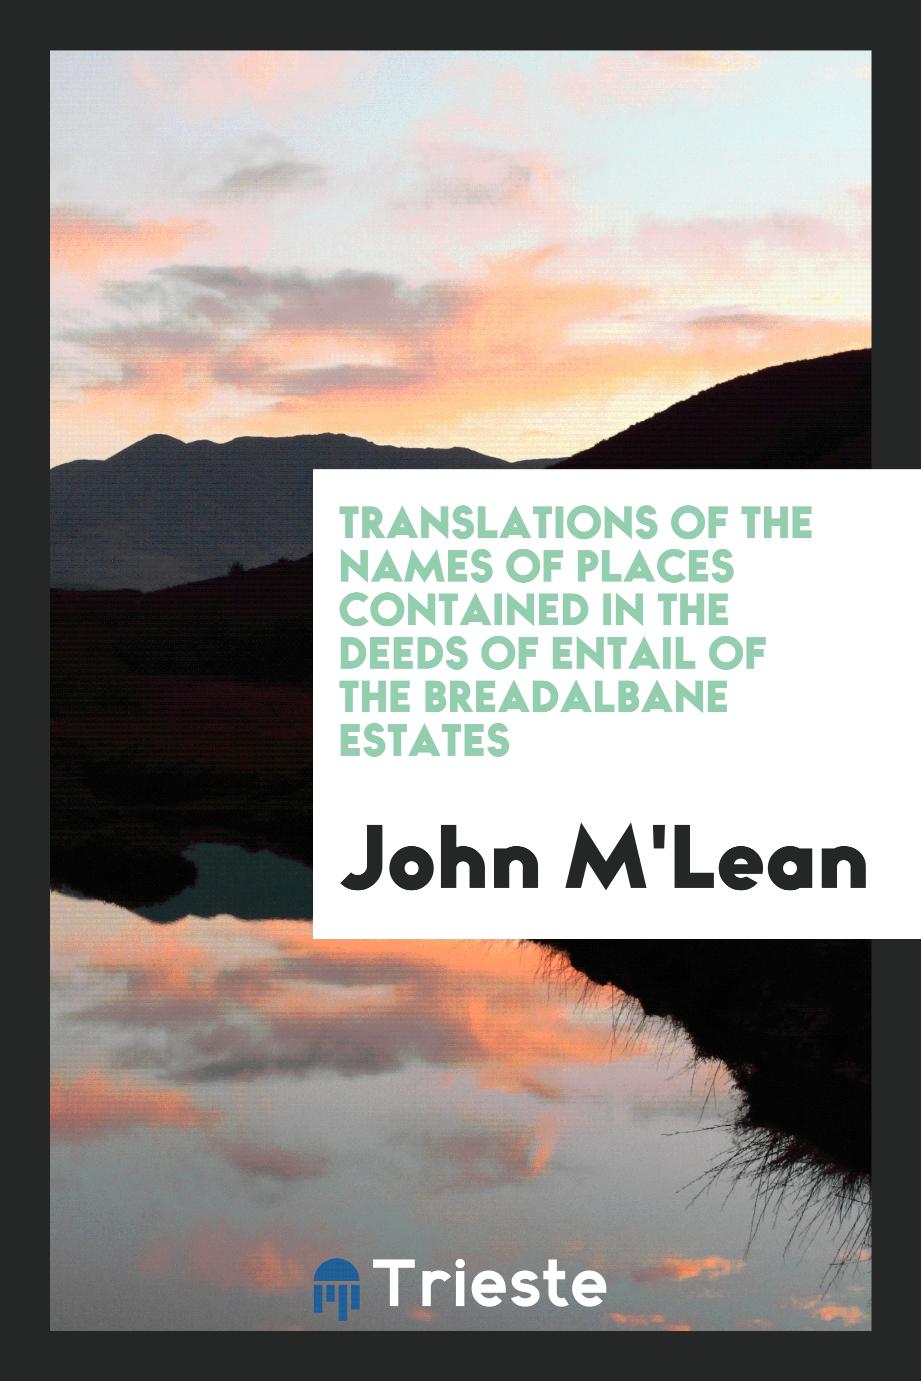 Translations of the Names of Places Contained in the Deeds of Entail of the Breadalbane estates